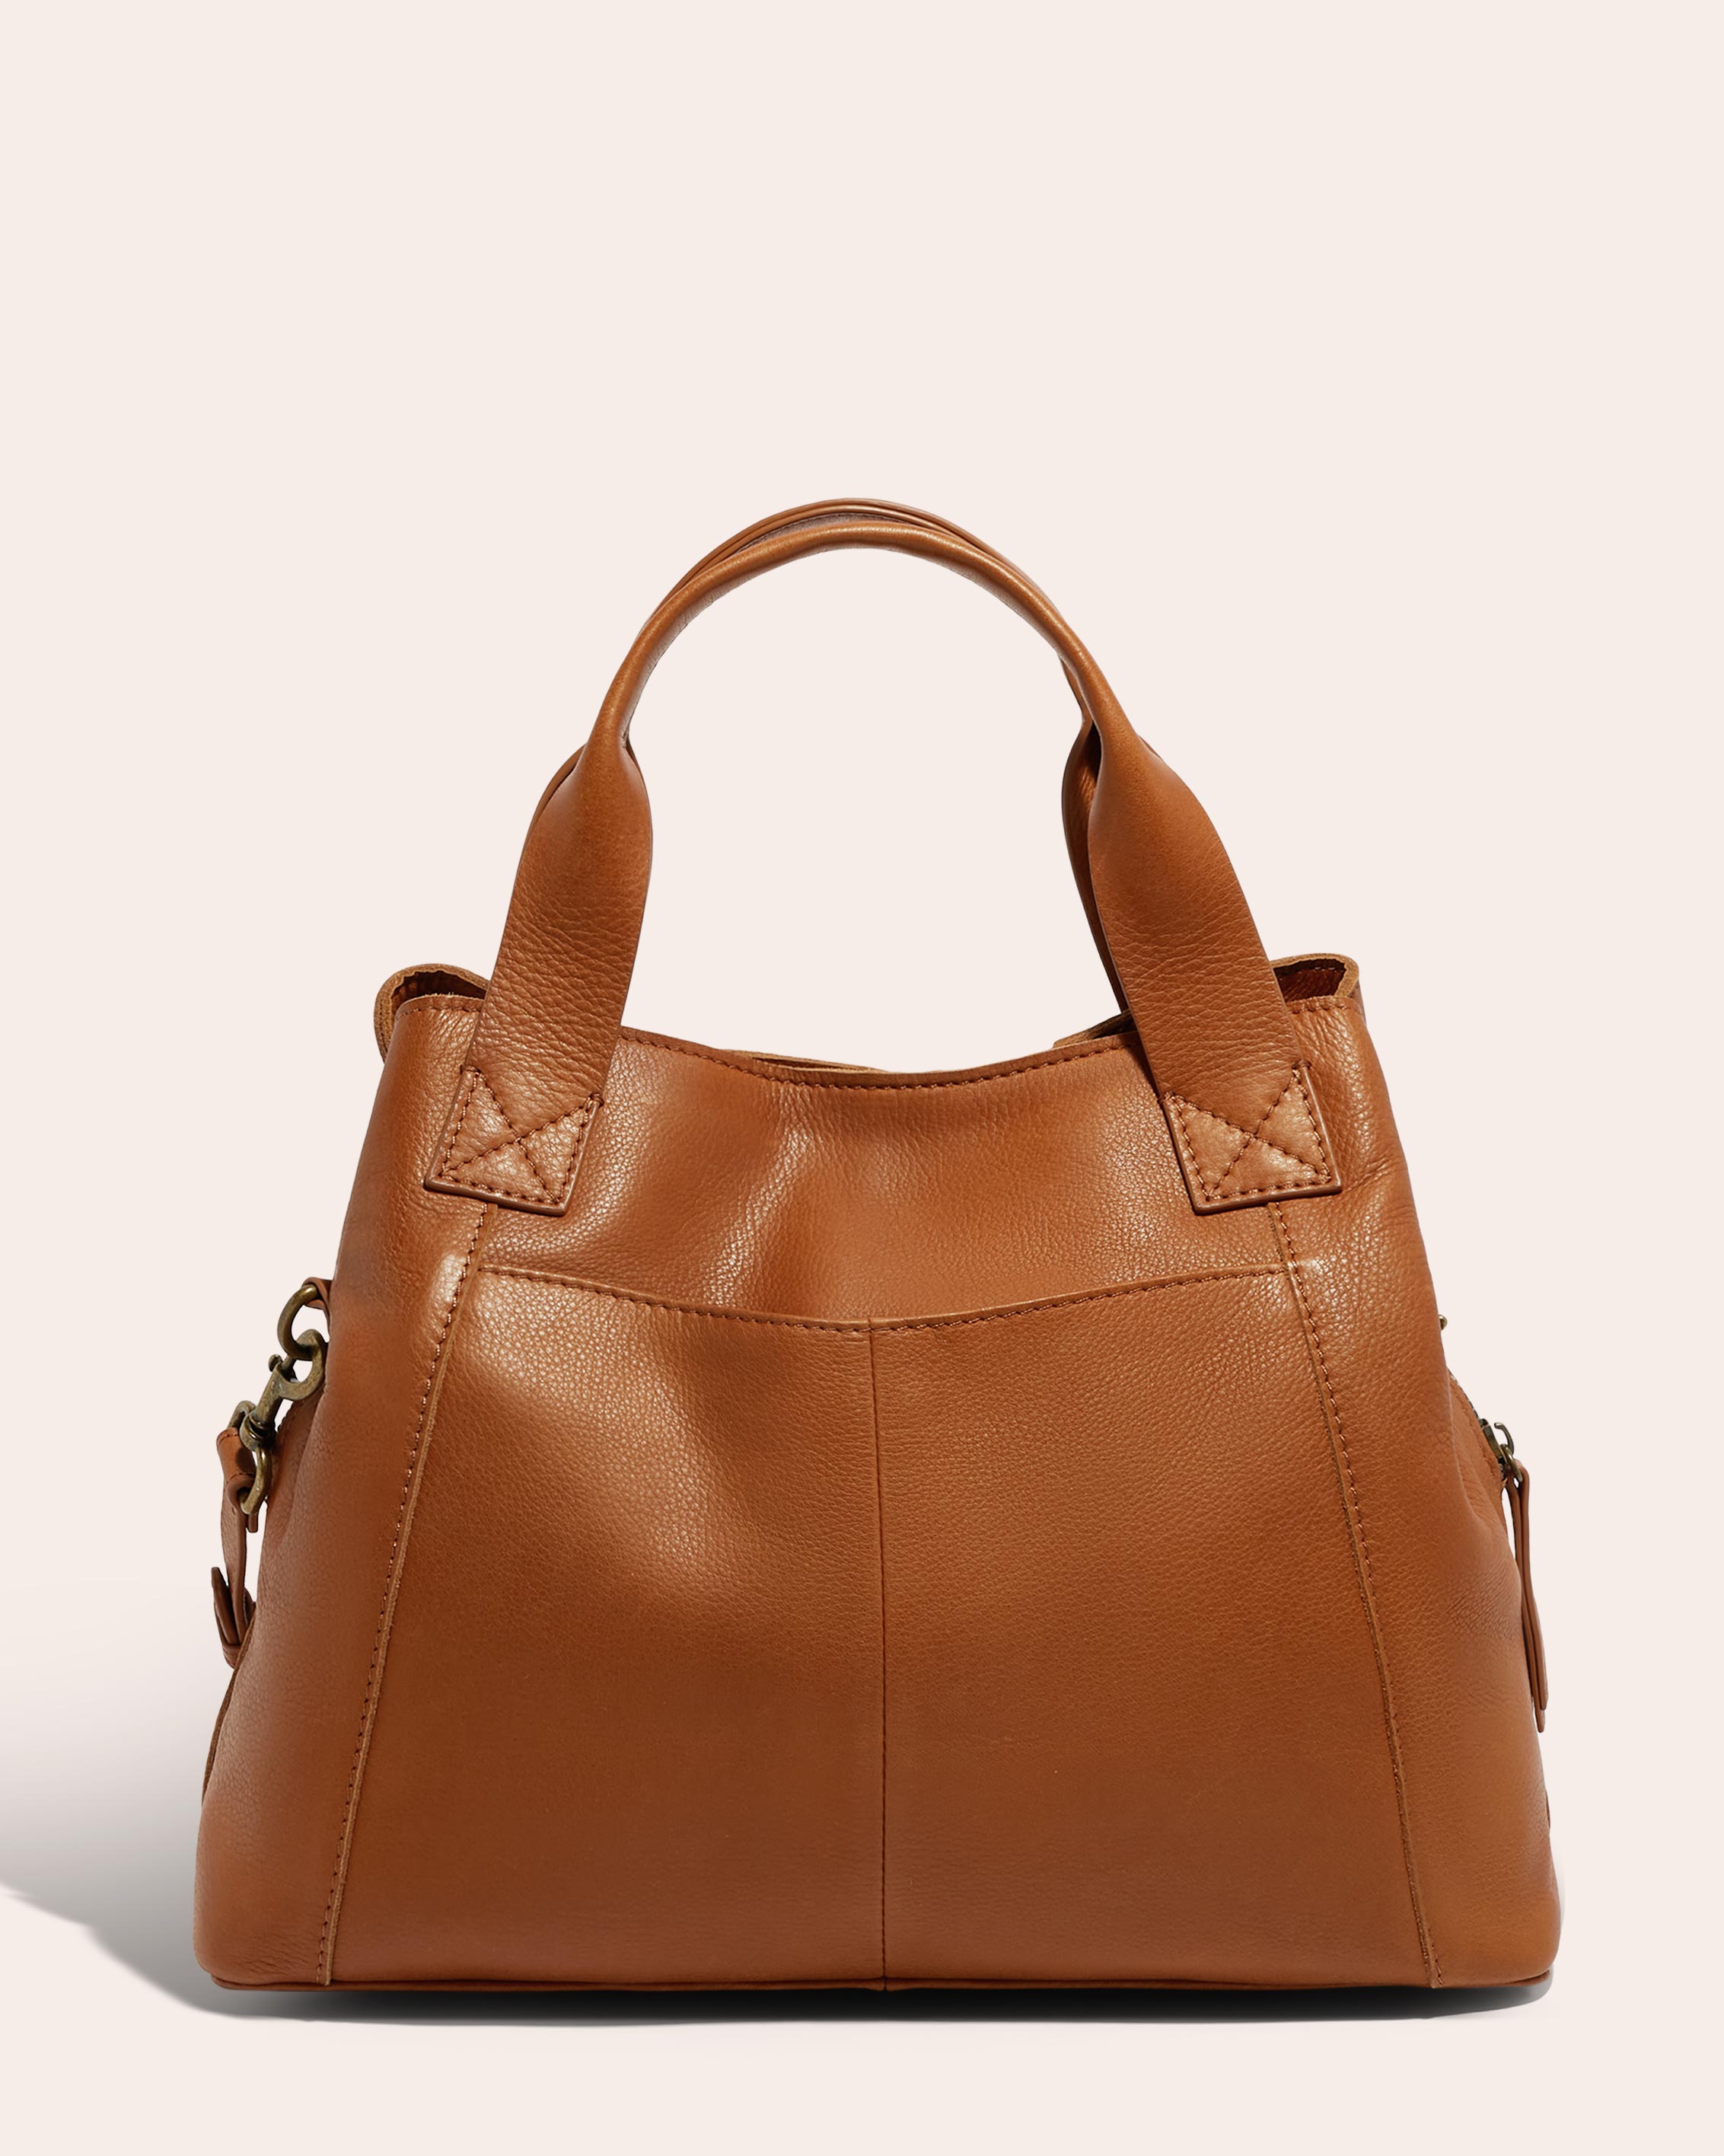 New 2021 Fashion Set In Of Solid Leather Handbags For Women Tax Free And  Solid Design By #ZB156 From Gift_59shop, $29.49